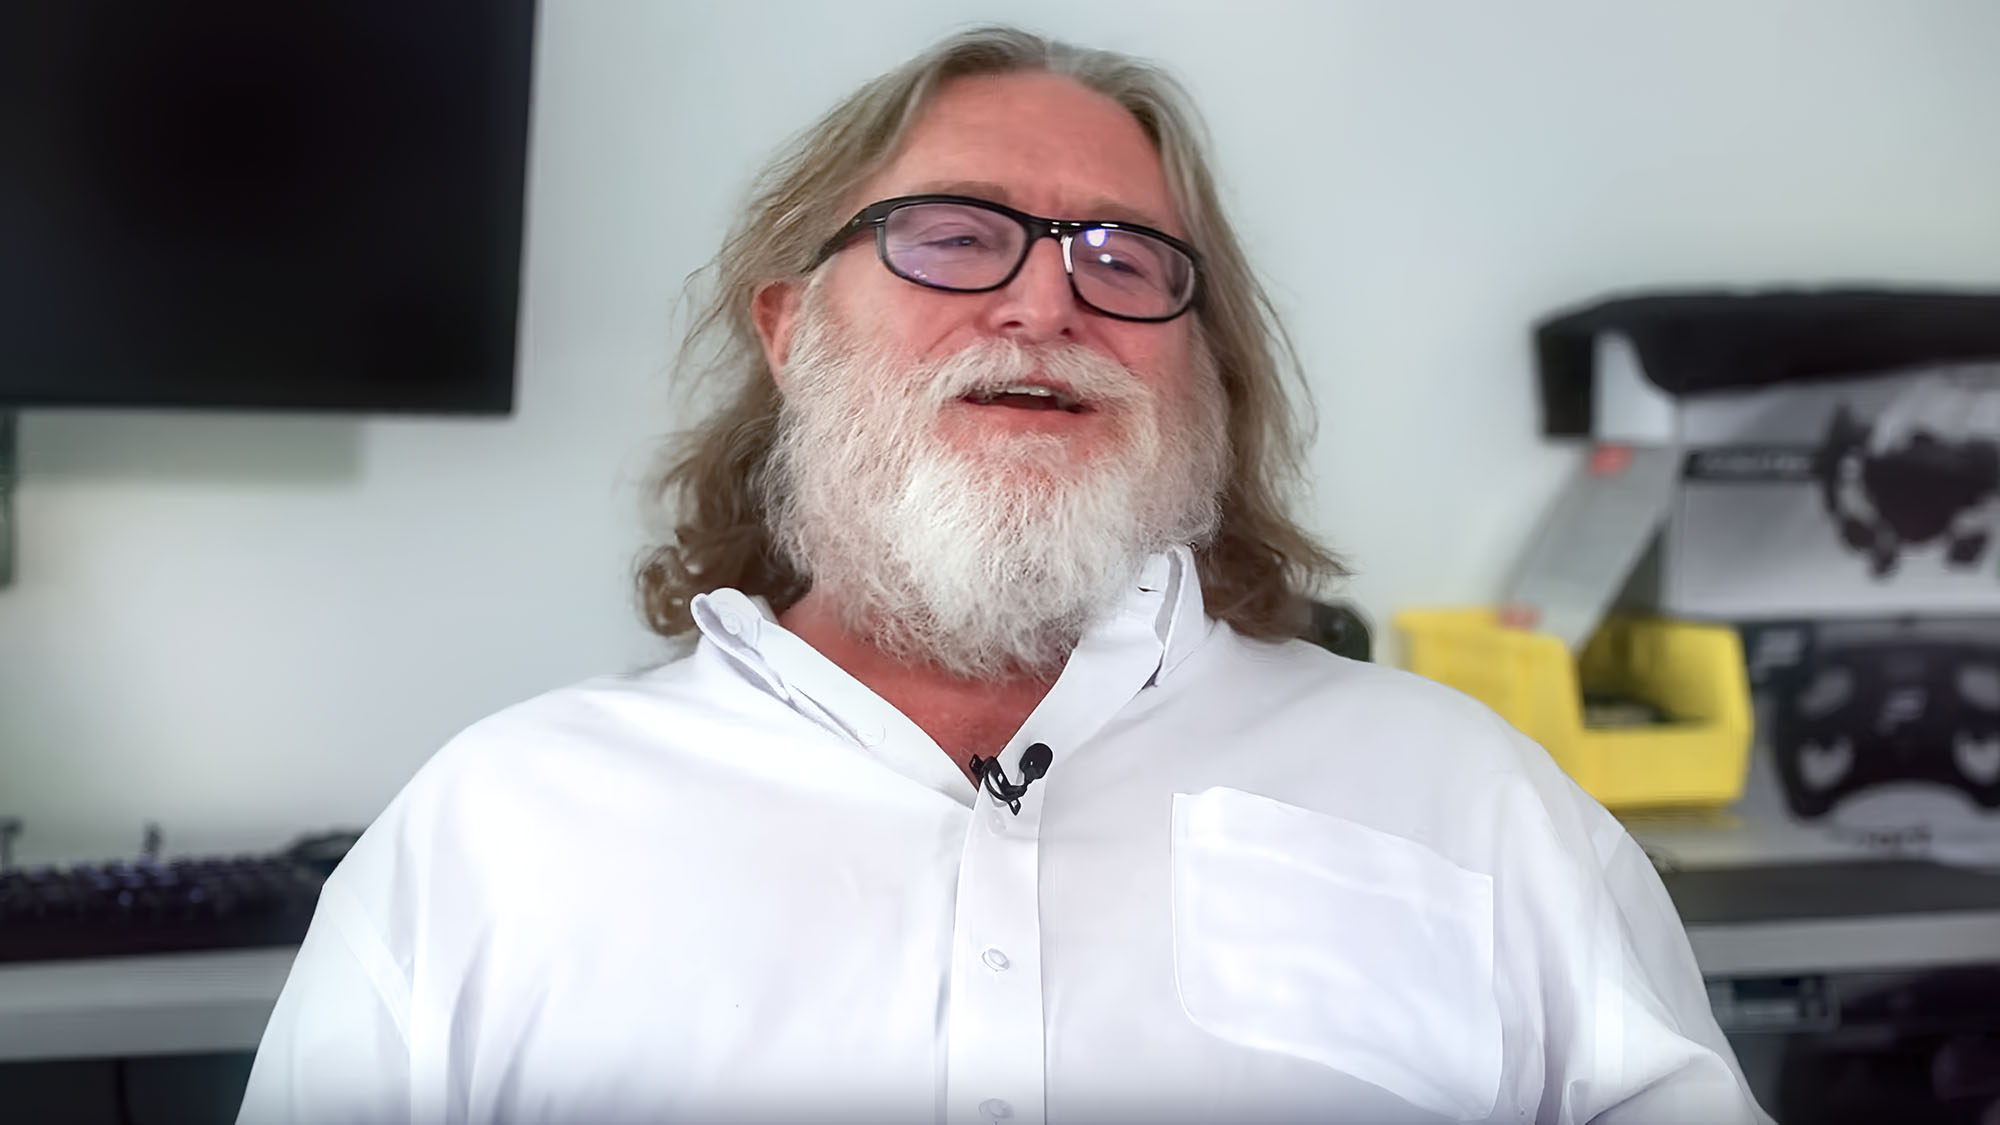 Gabe Newell - Variety500 - Top 500 Entertainment Business Leaders